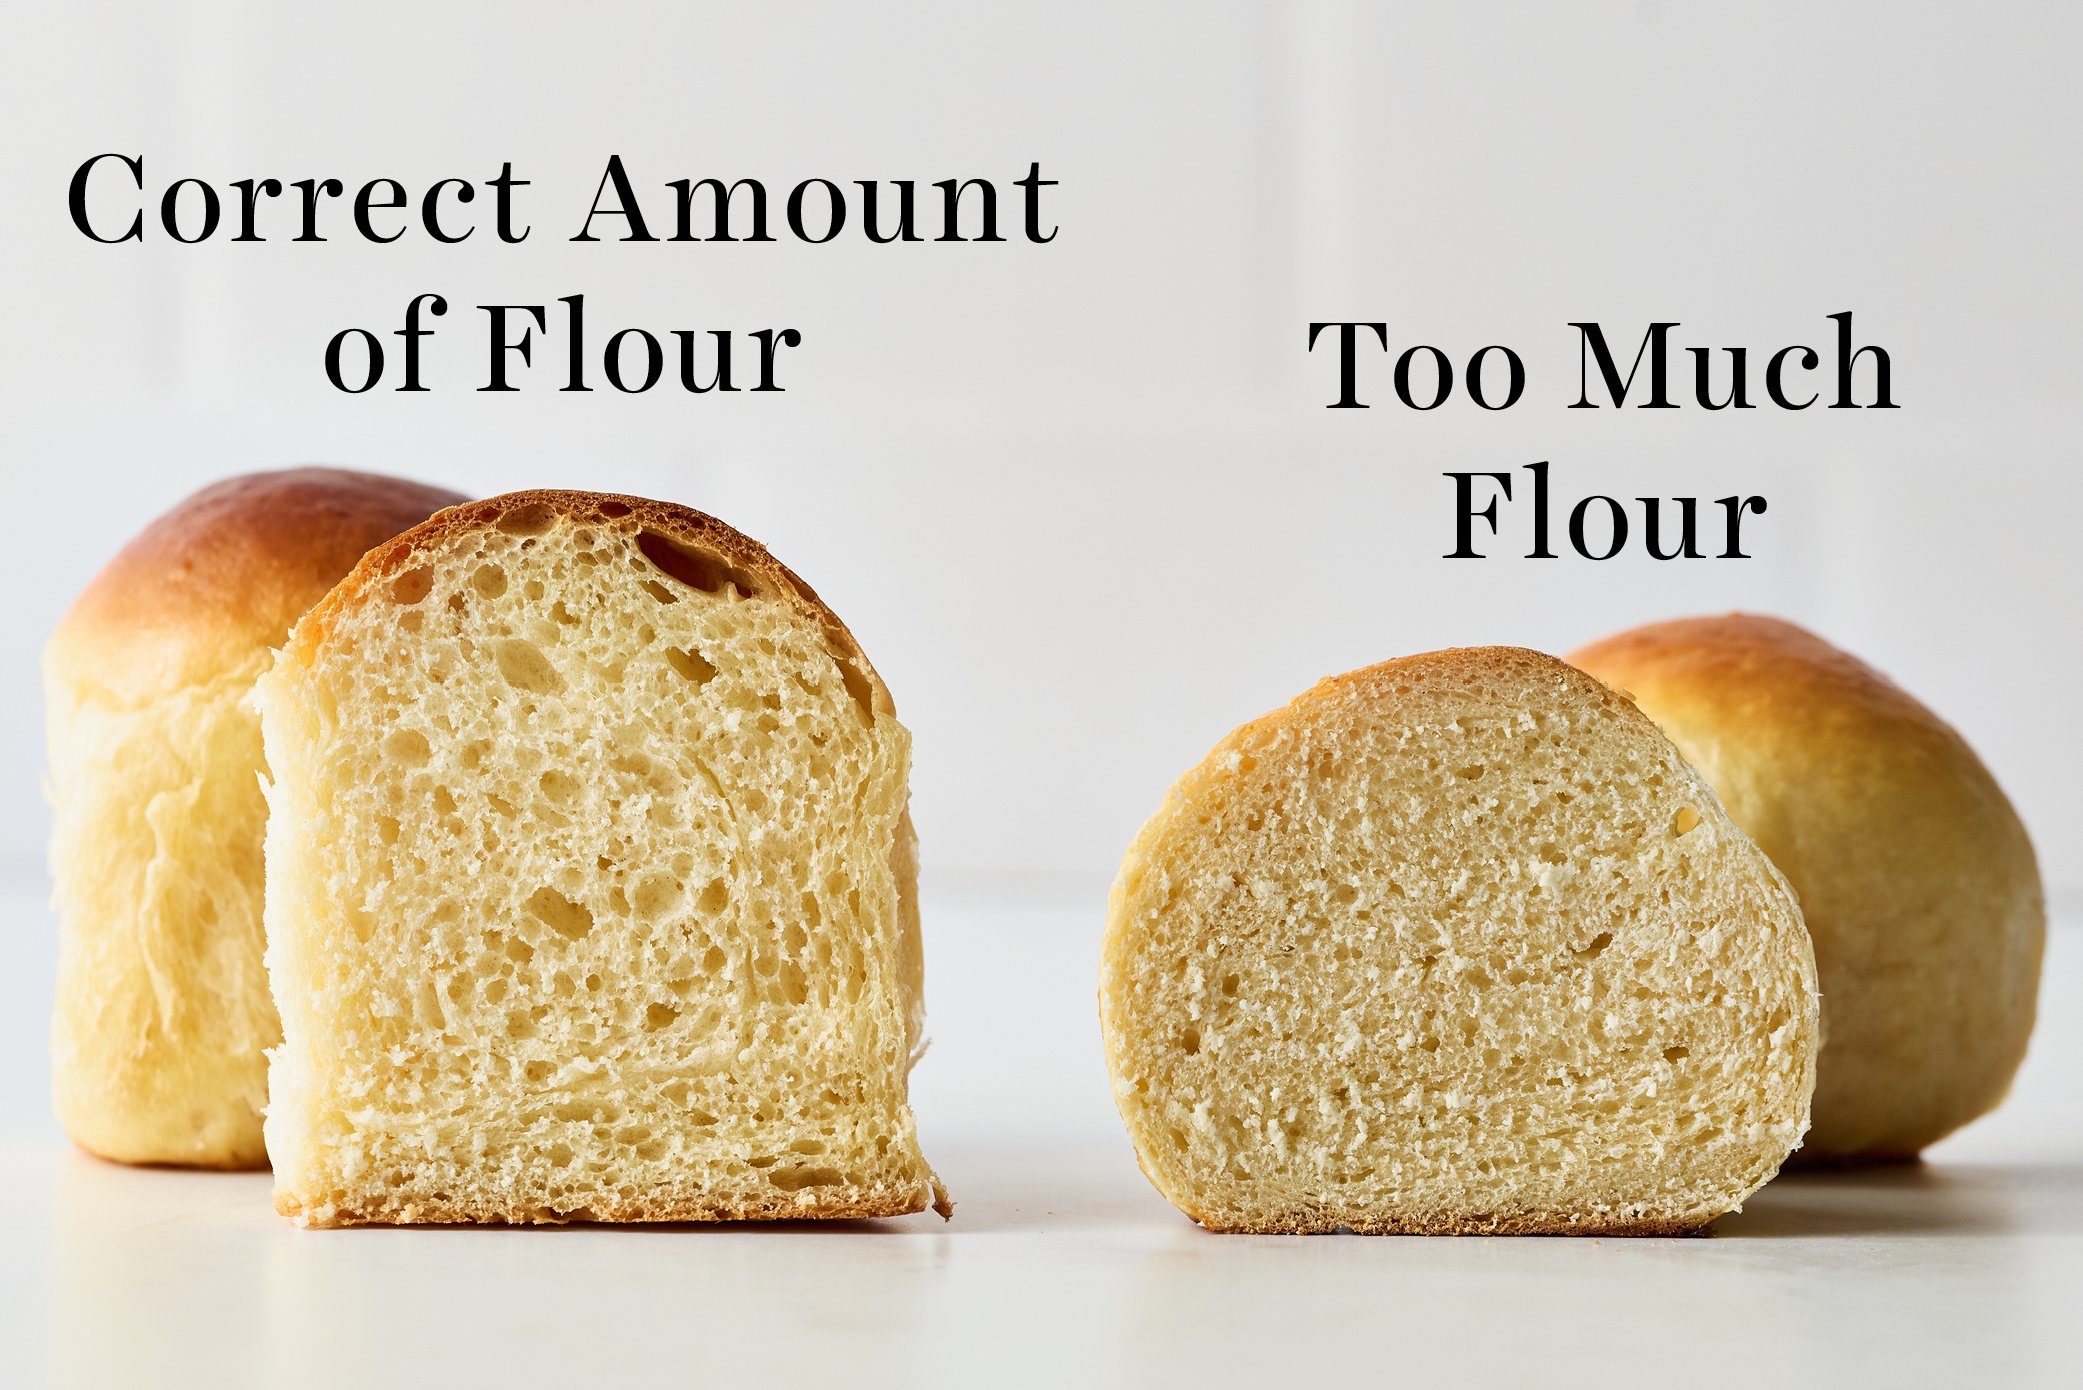 comparison of bread rolls with the correct amount of flour vs. too much flour